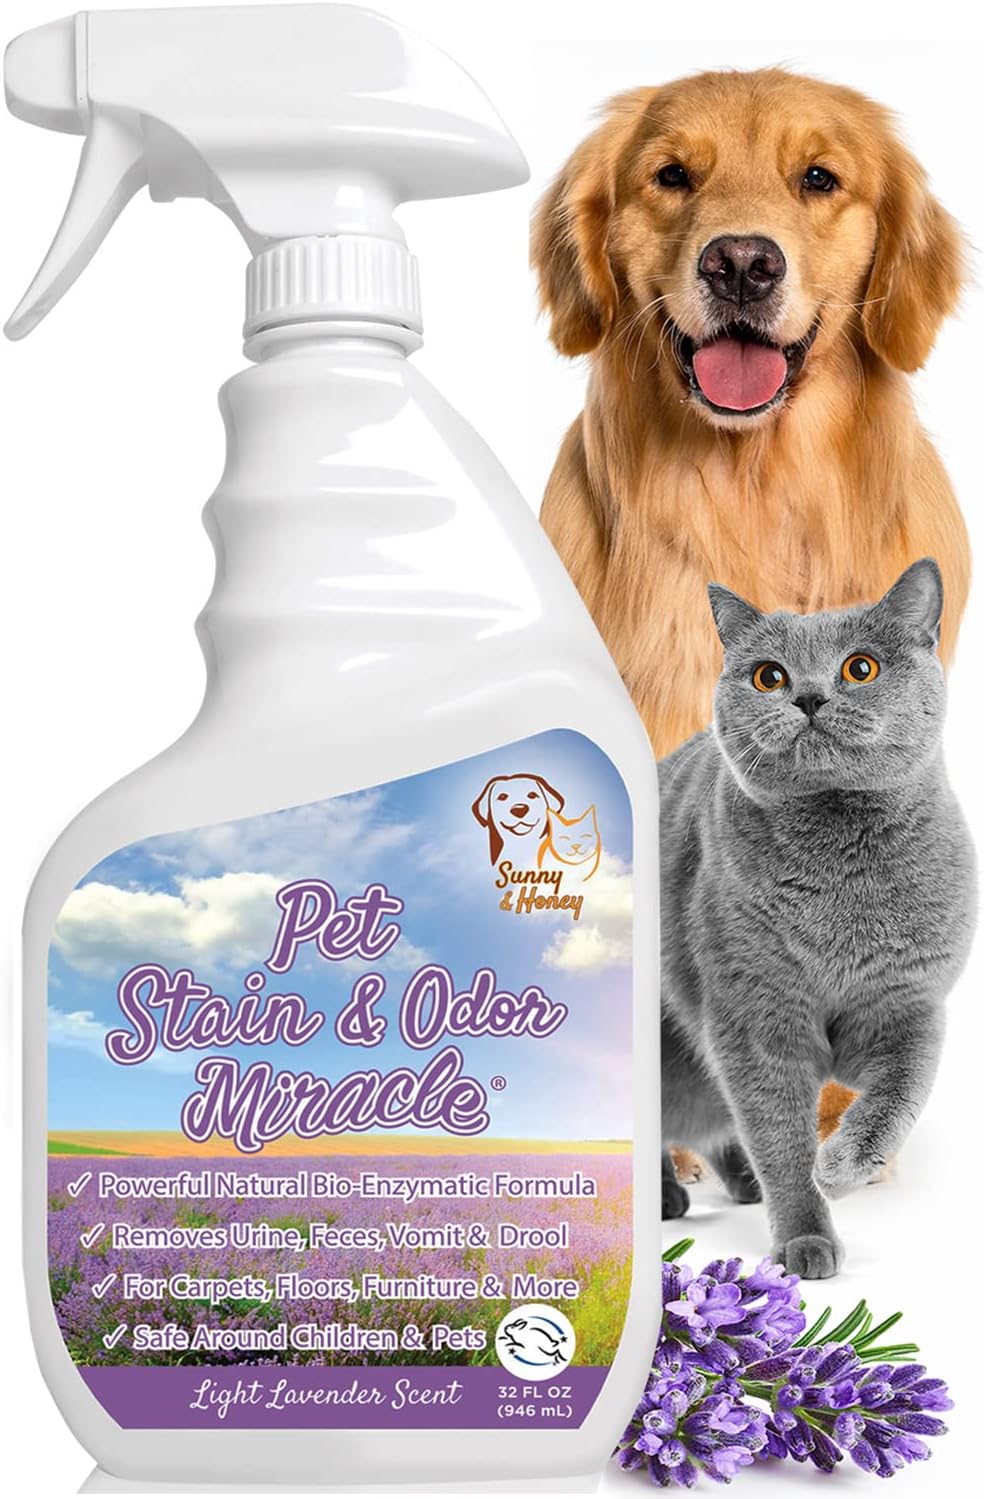 Sunny & Honey Pet Stain &; Geur Miracle